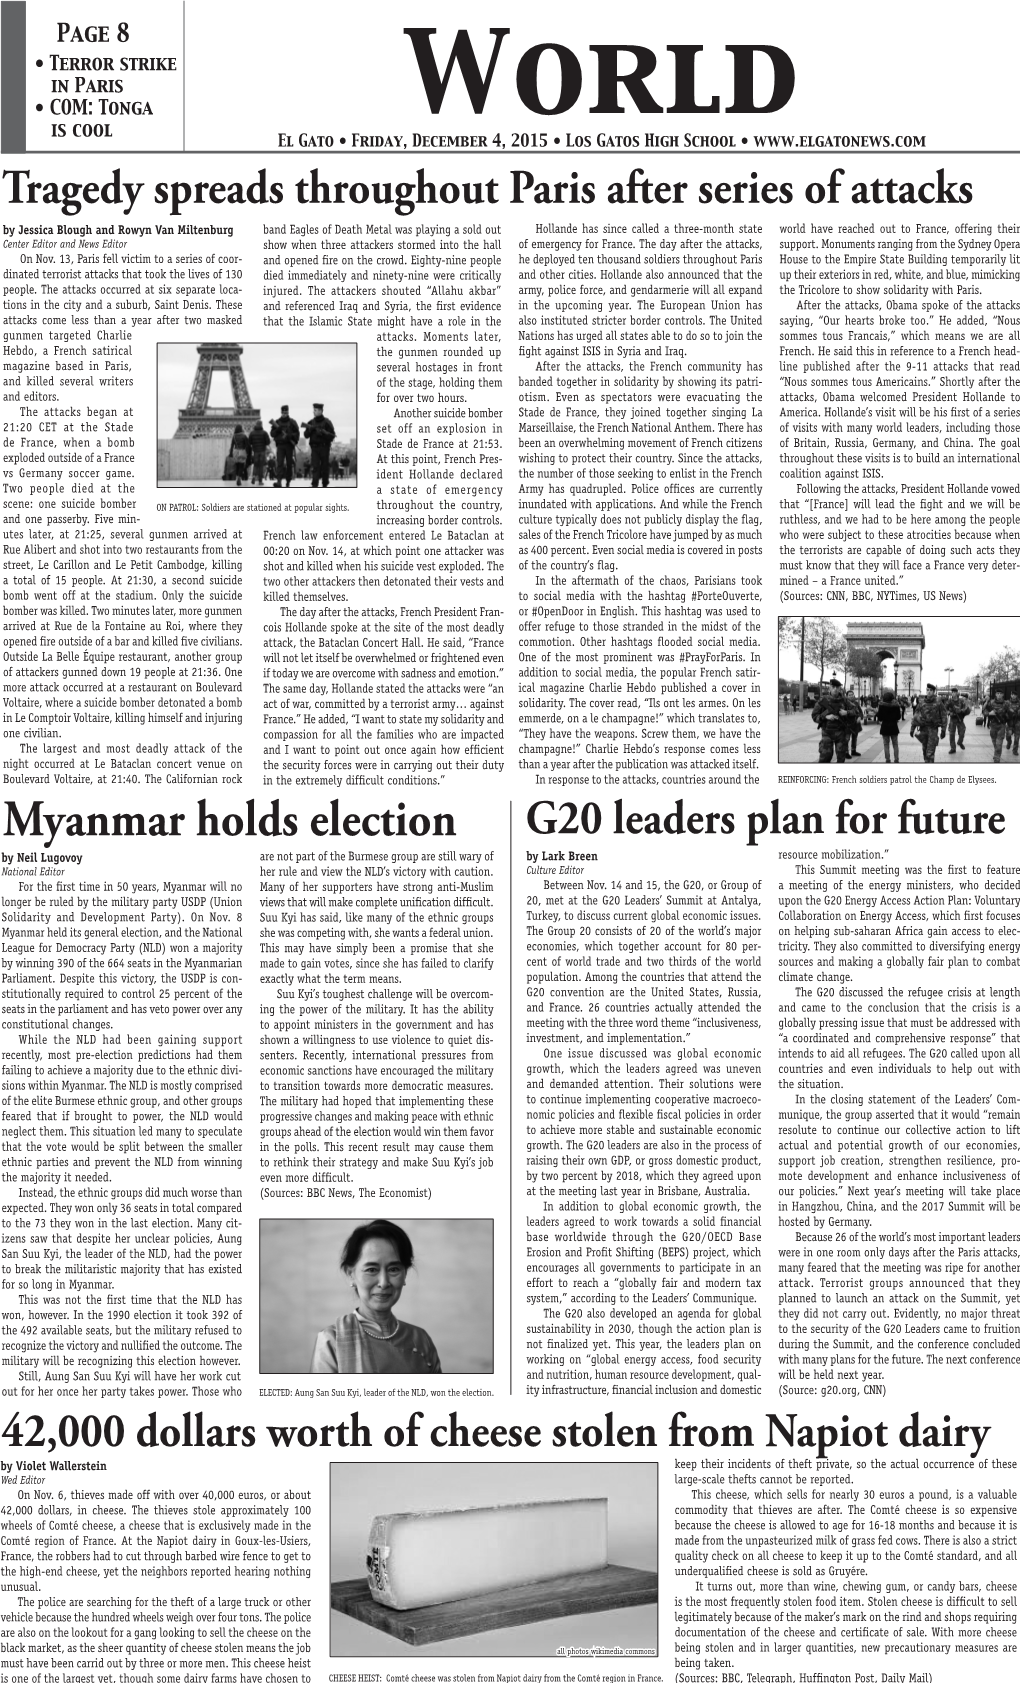 Myanmar Holds Election